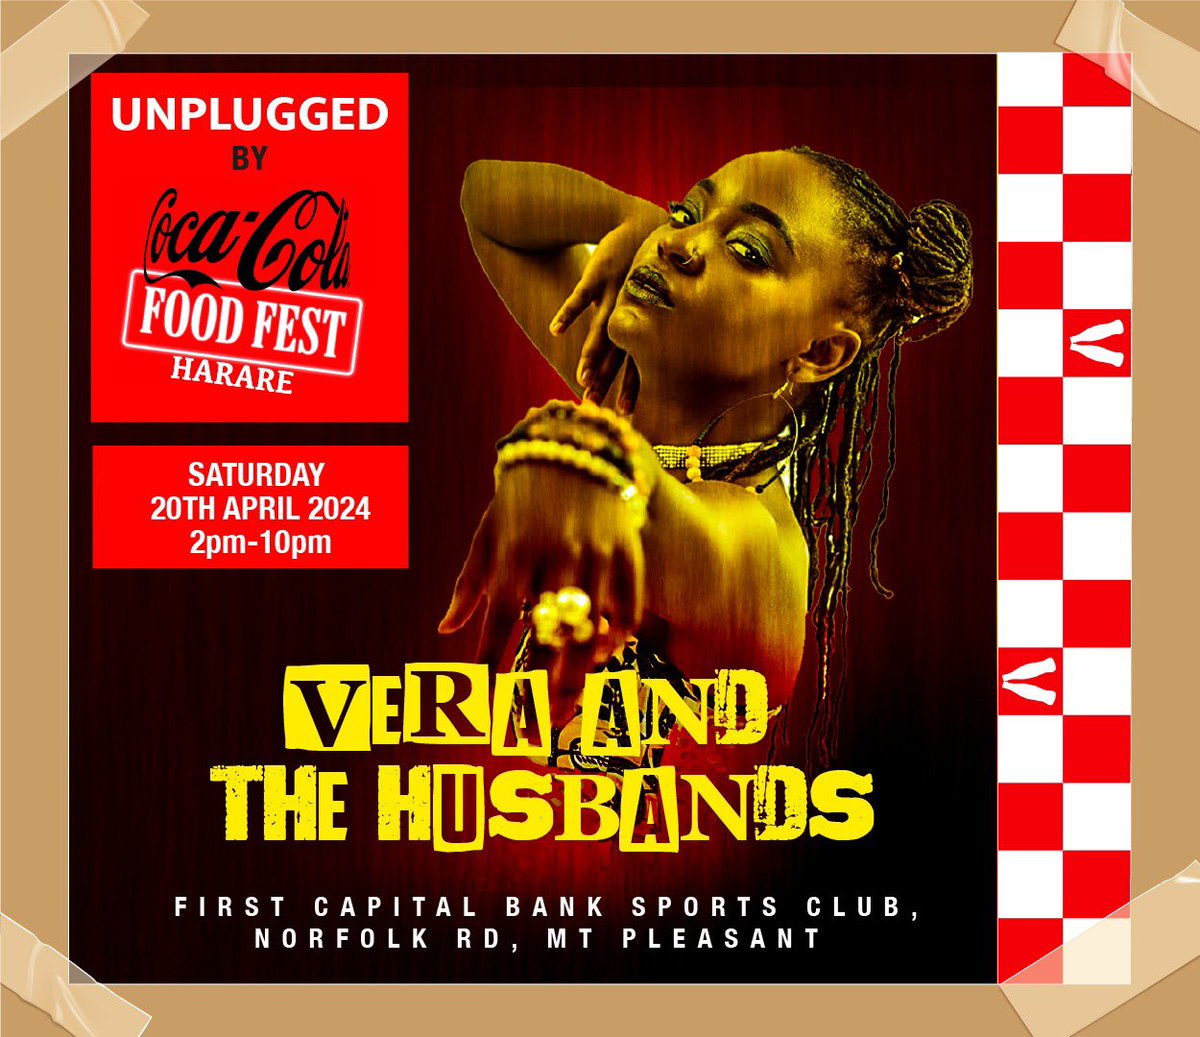 Bringing those jazzy soulfest daytime vibes for the #CokeFoodFestival with @Vera_zw . We just love seeing her on the Unplugged stage! #BringItBack #MusicMealsMemories #Unplugged@10